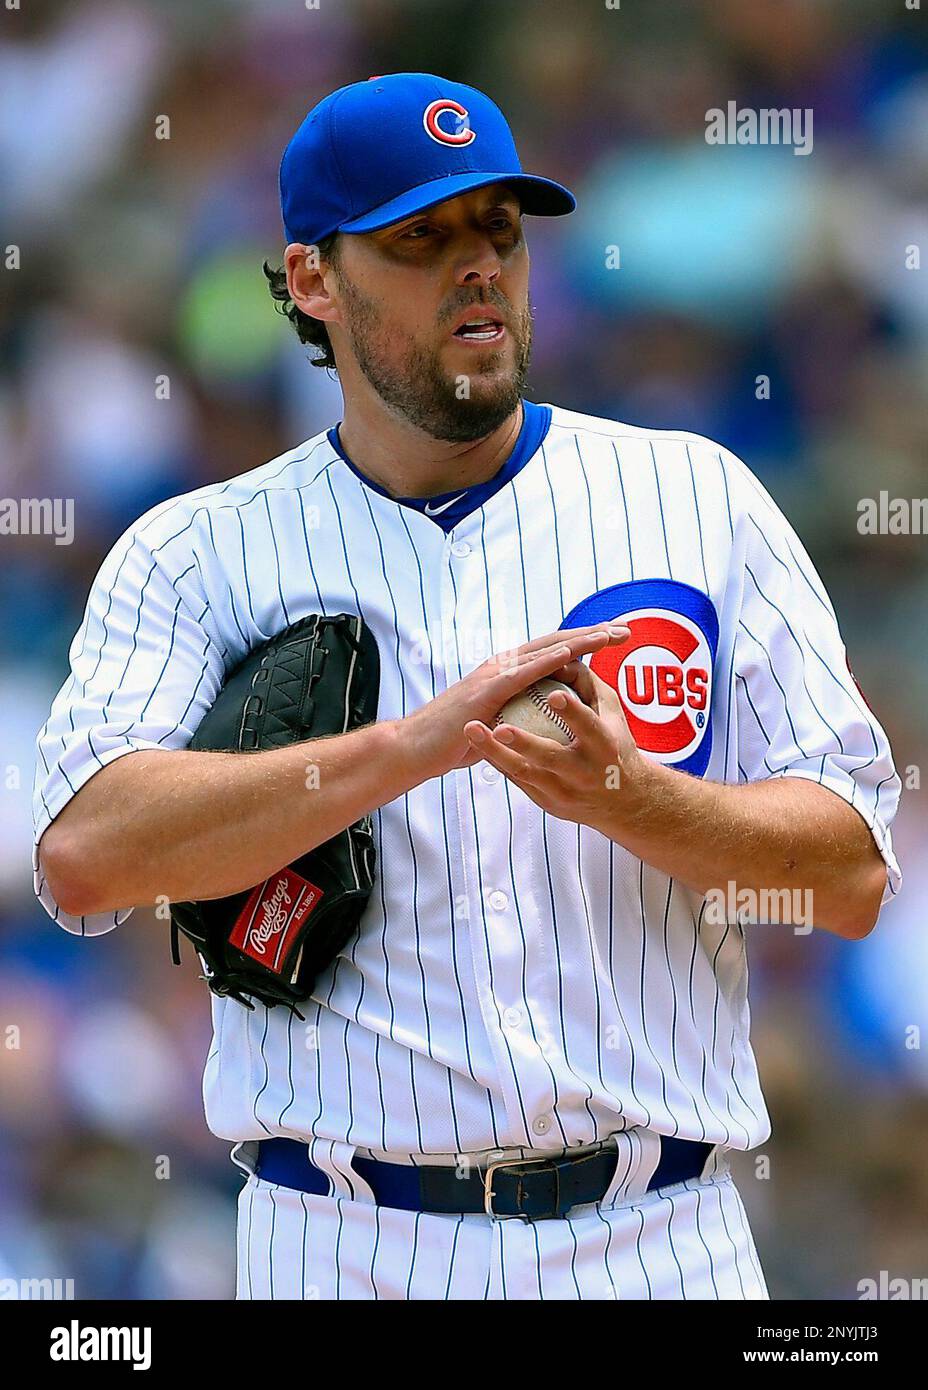 CHICAGO, IL - JULY 05: Chicago Cubs starting pitcher John Lackey (41) wipes  the ball during the game between the Tampa Bay Rays and the Chicago Cubs on  July 5, 2017 at